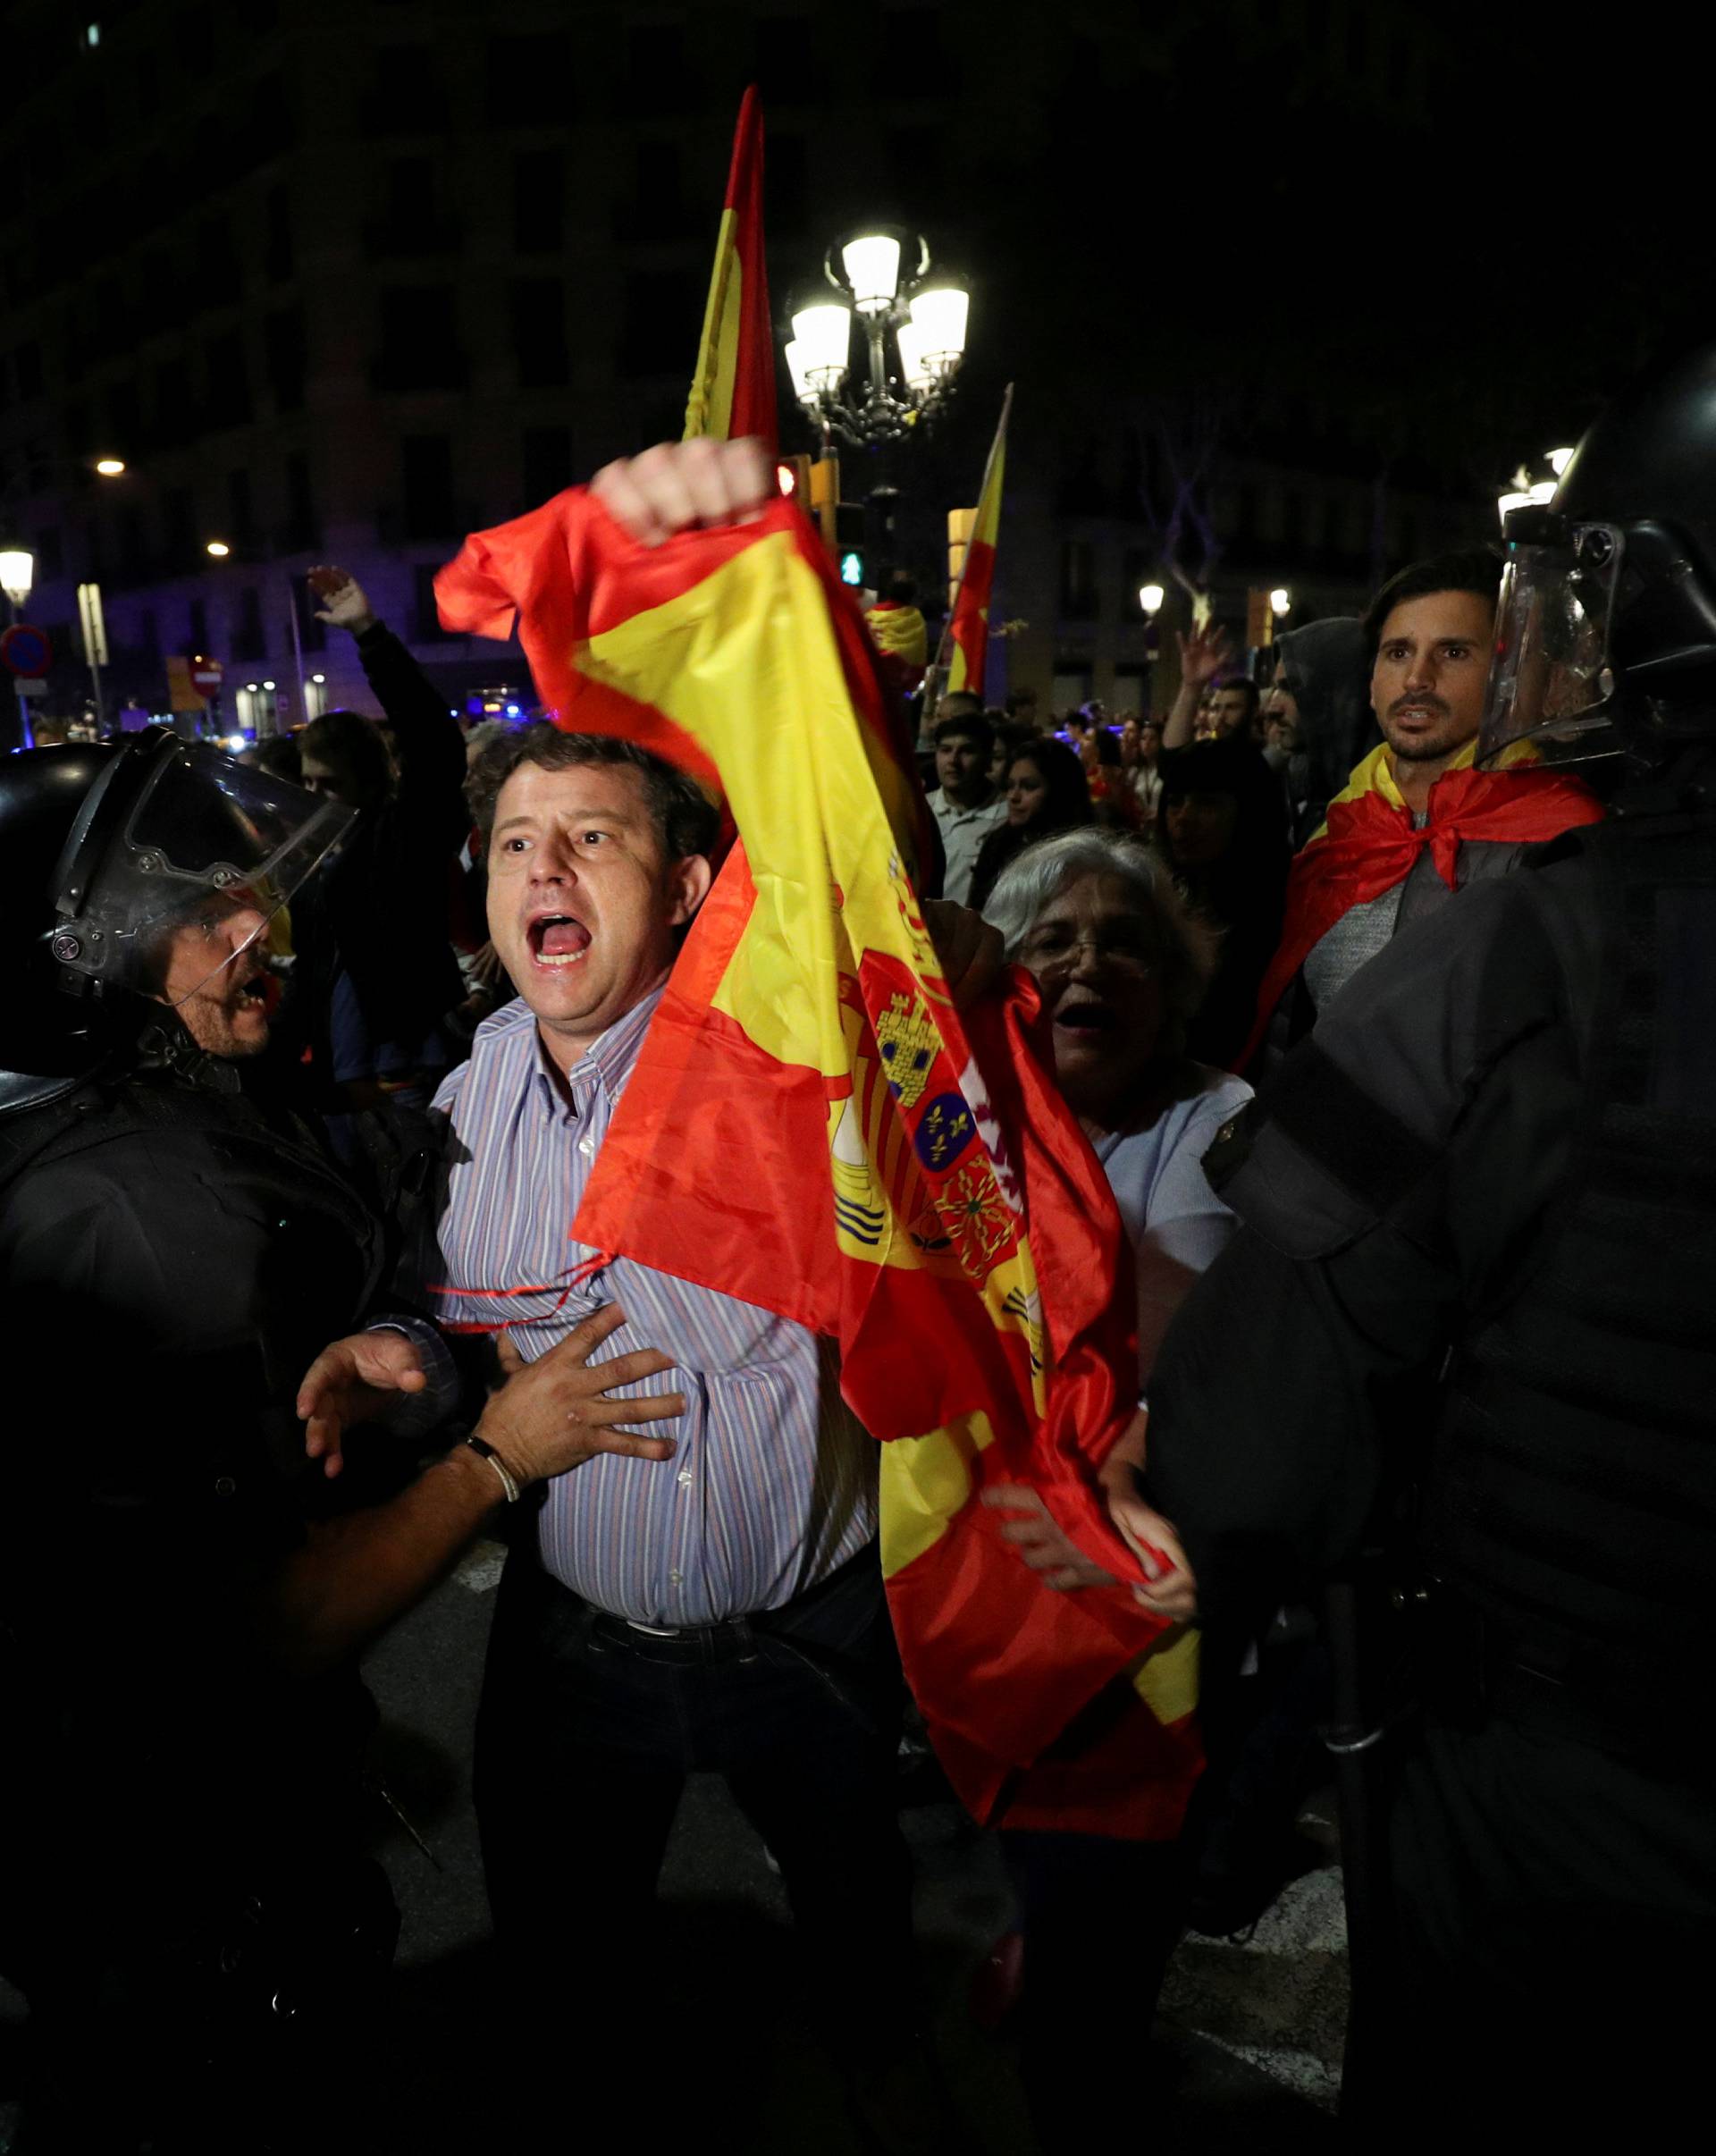 A pro unity demonstrator is stopped by Catalan Regional Police officer during a protest after the Catalan regional parliament declared independence from Spain in Barcelona